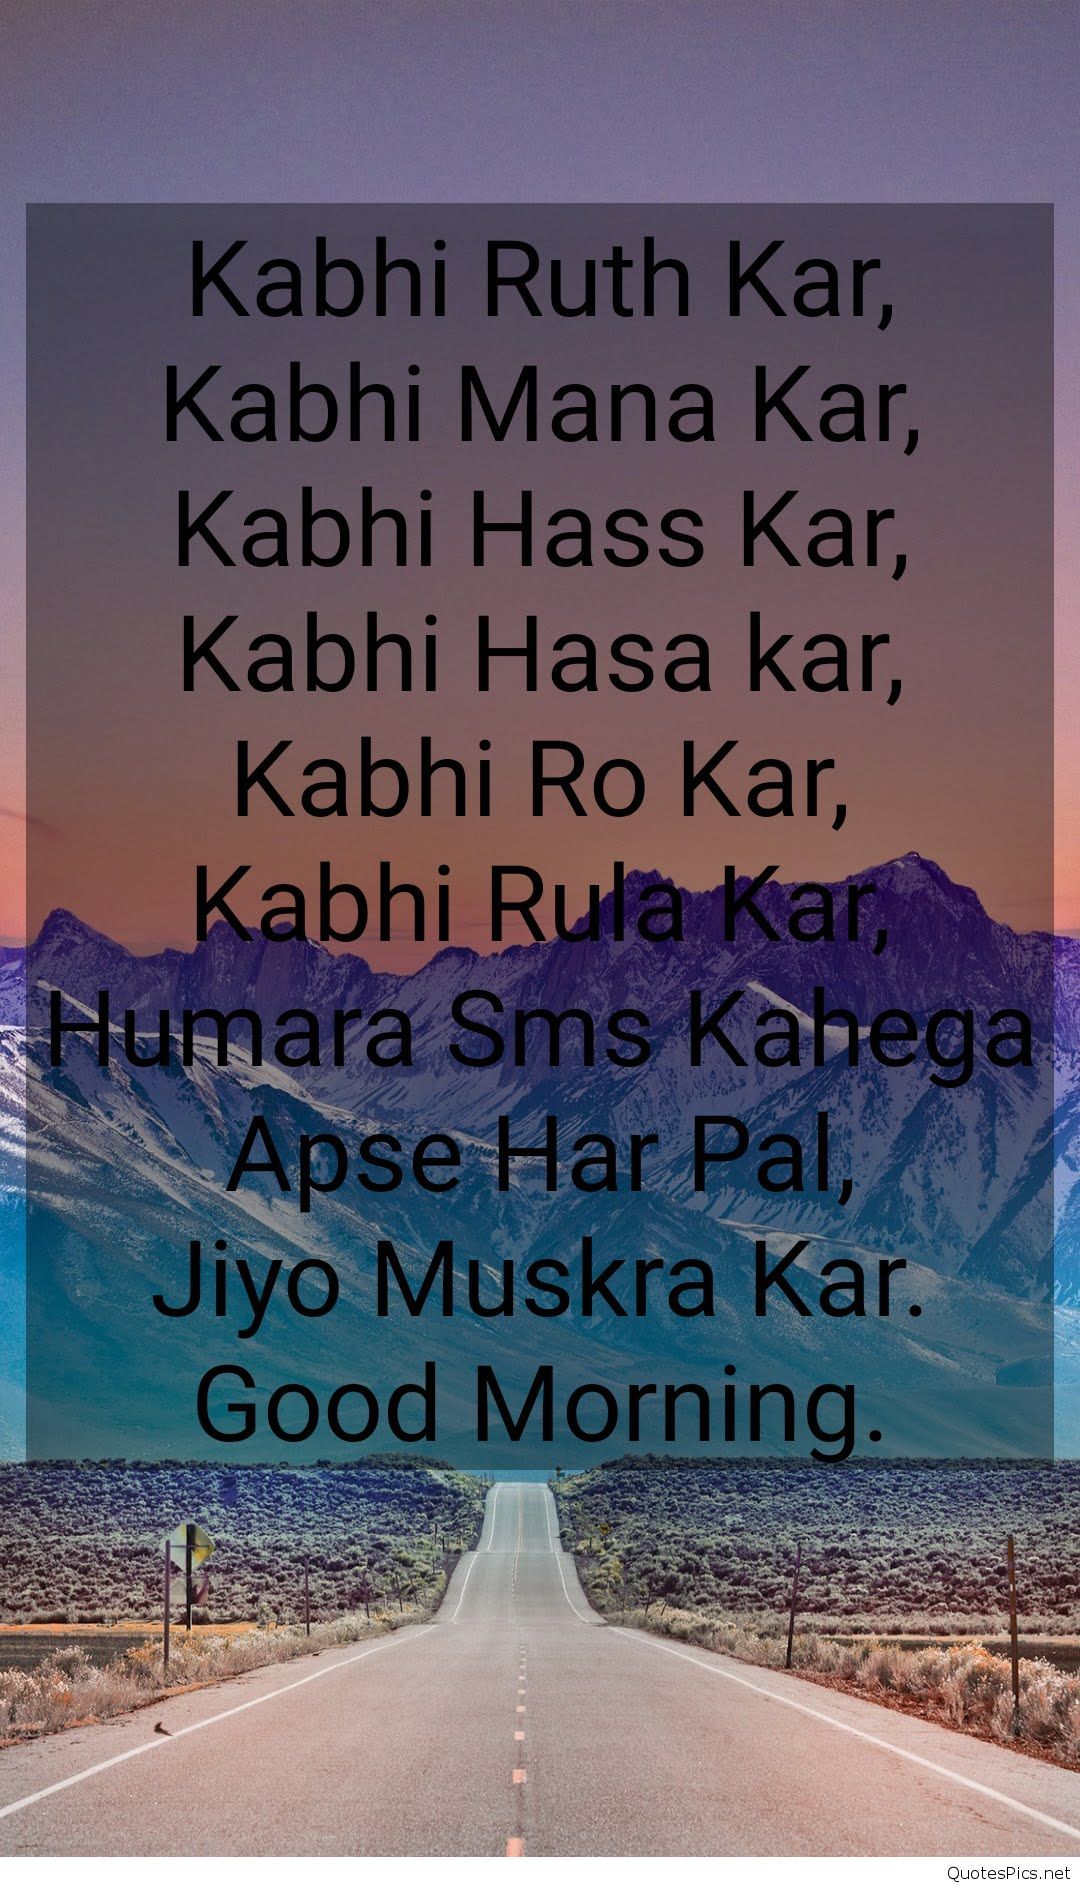 Good Morning Images With Inspirational Quotes Hd In Hindi ...